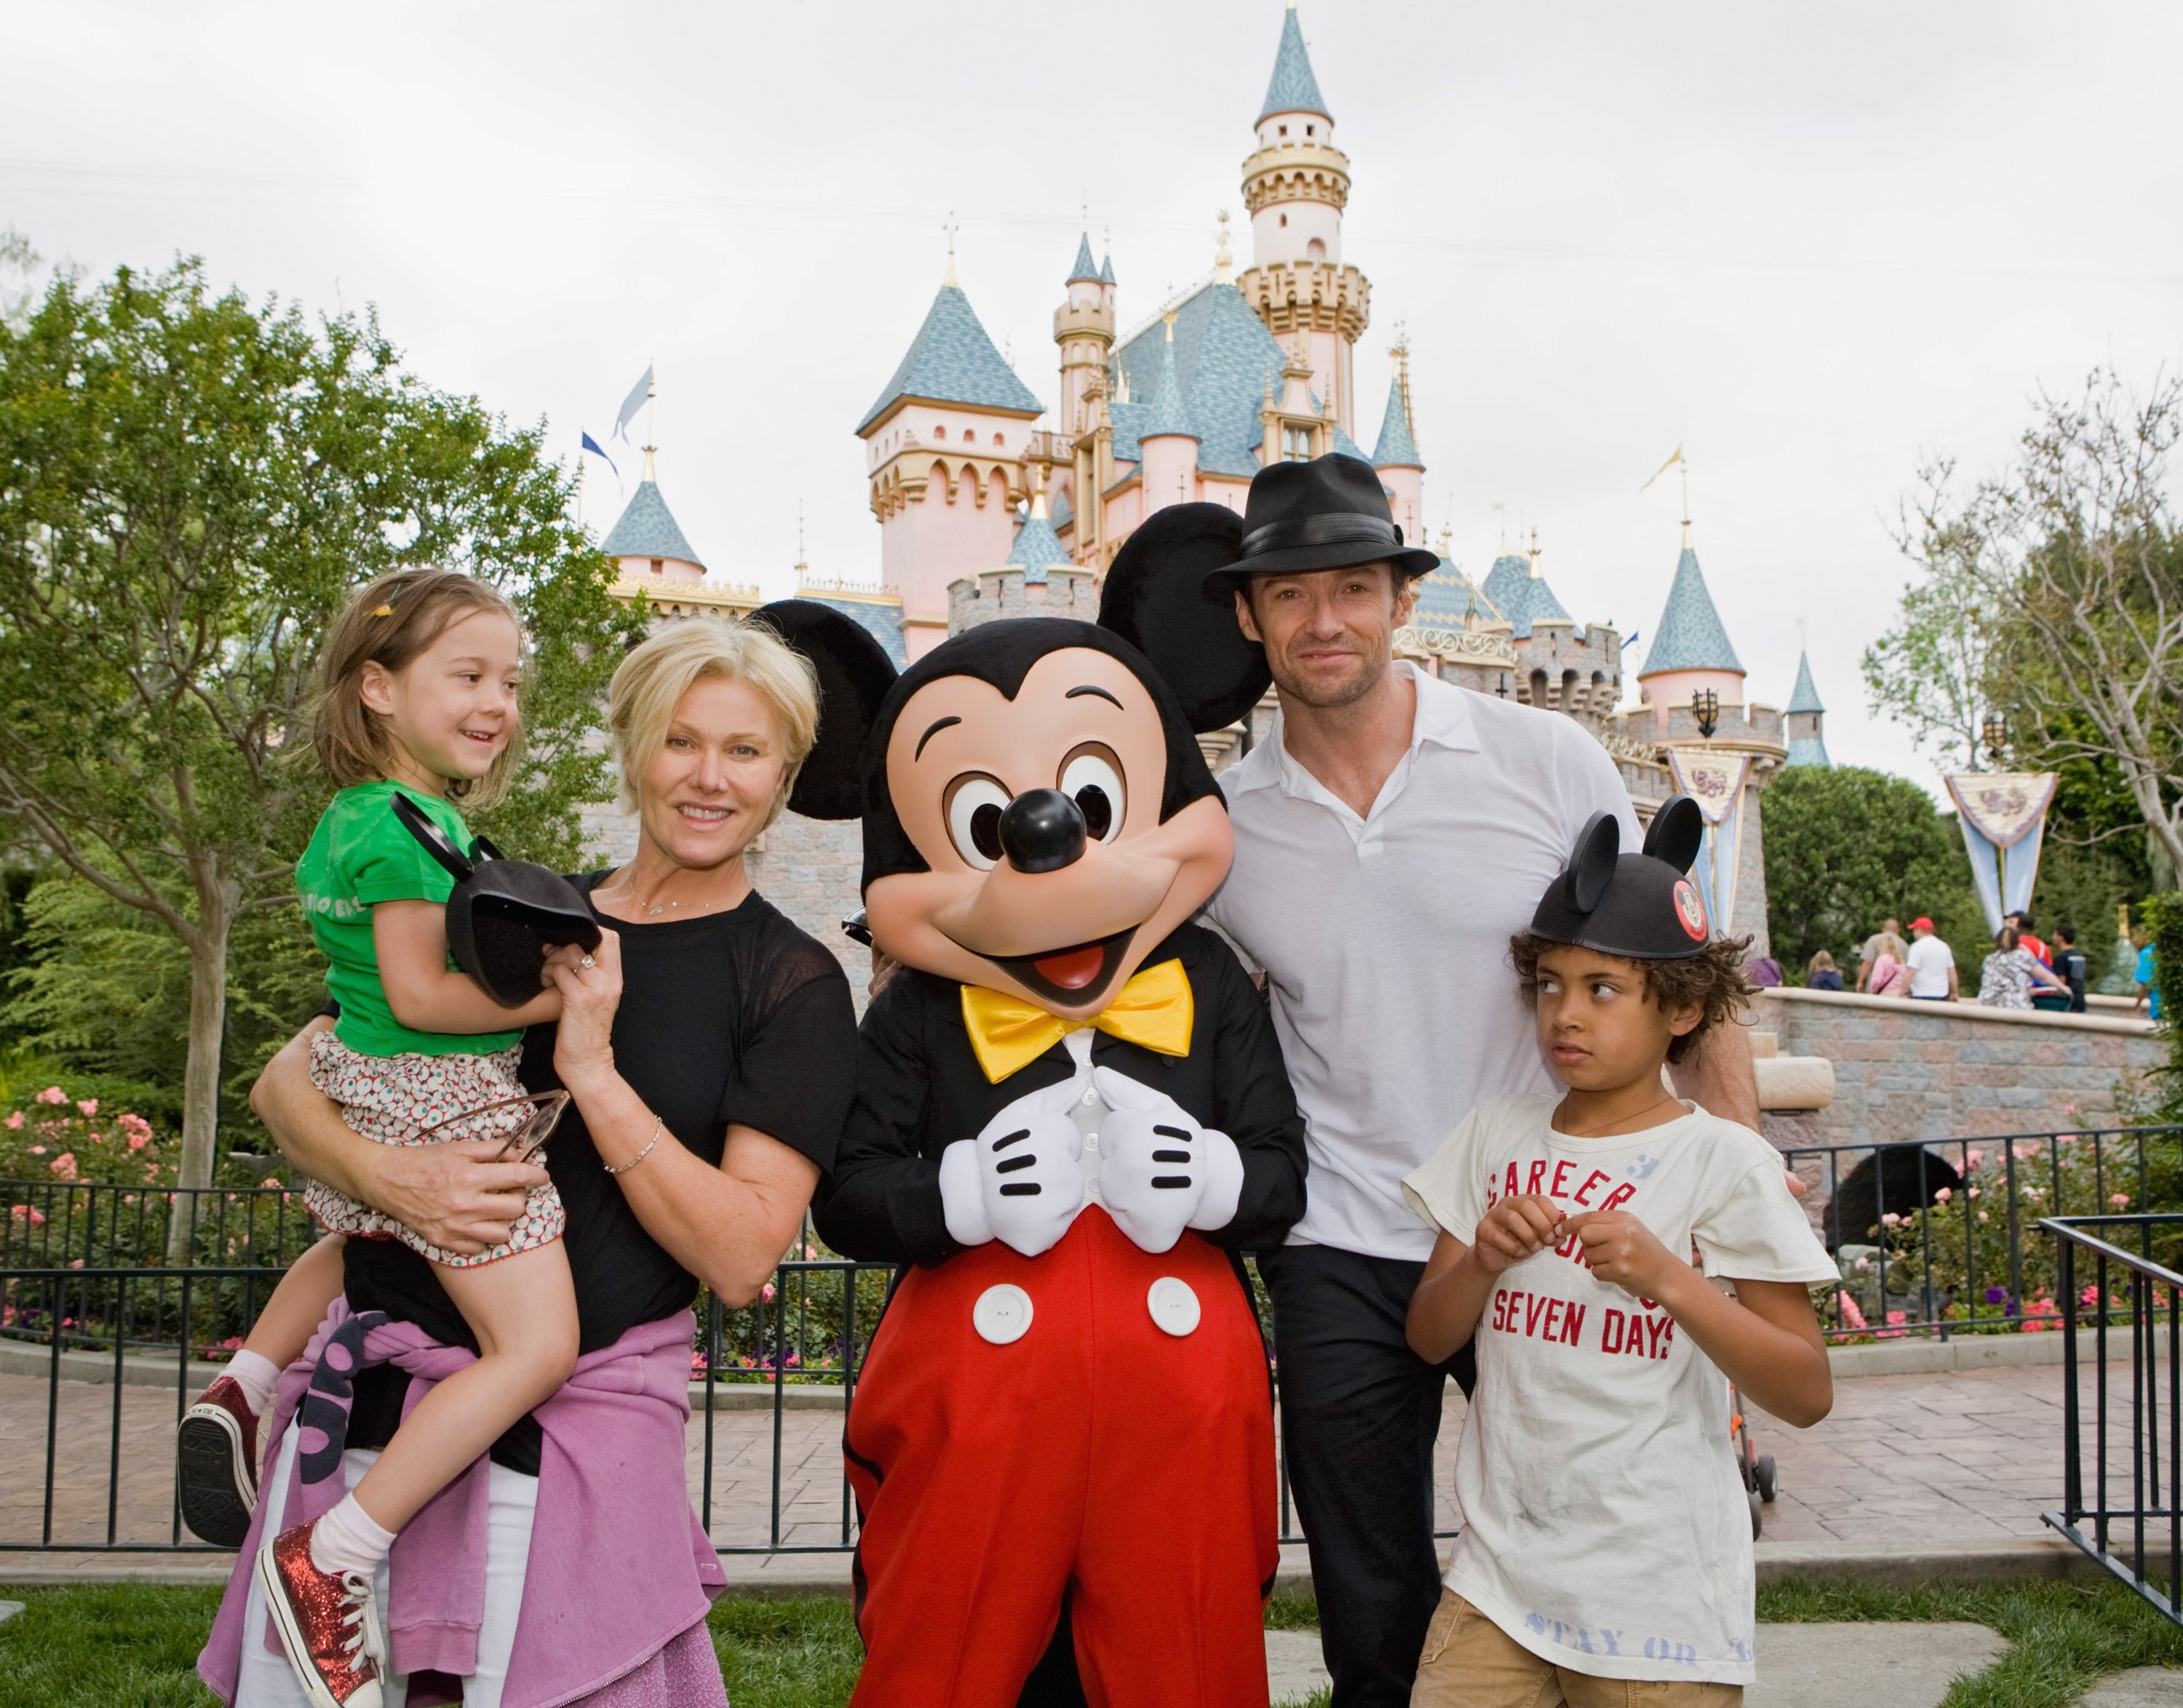 Hugh Jackman with wife Deborra Lee and kids Oscar and Ava at Disneyland in Anaheim, California on April 23, 2009 | Photo: Getty Images